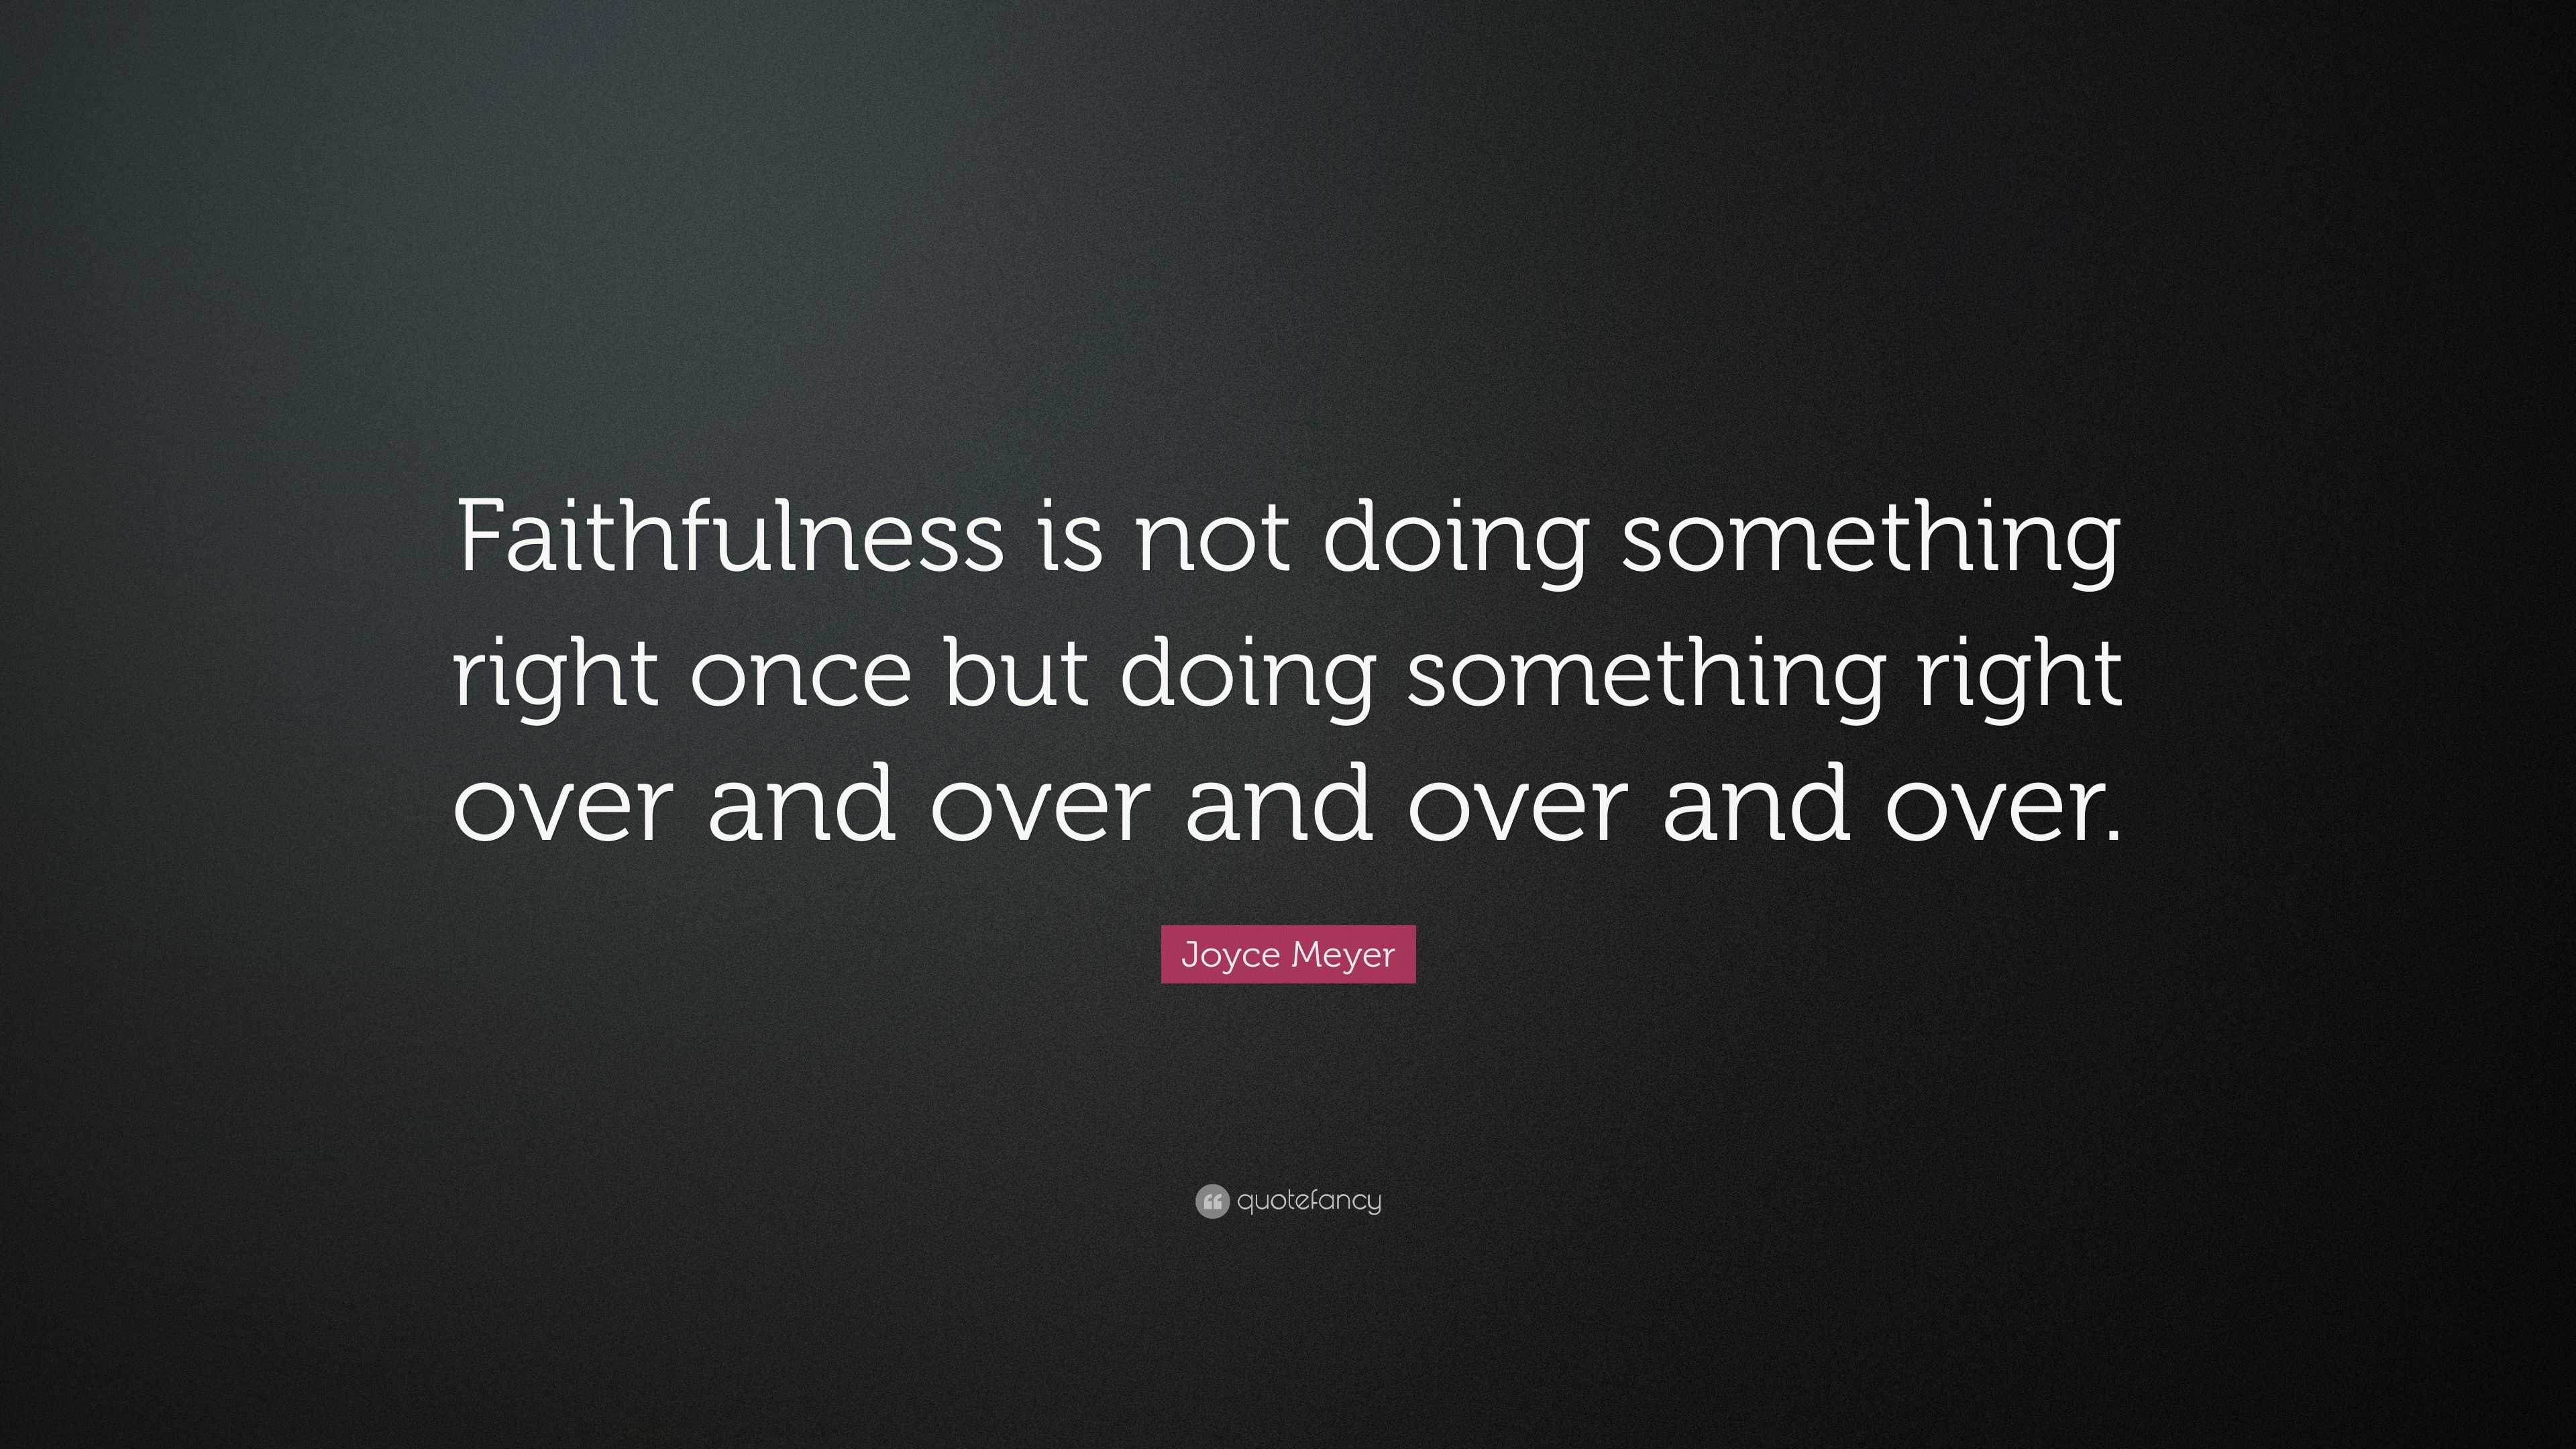 Joyce Meyer Quote: “Faithfulness is not doing something right once but ...